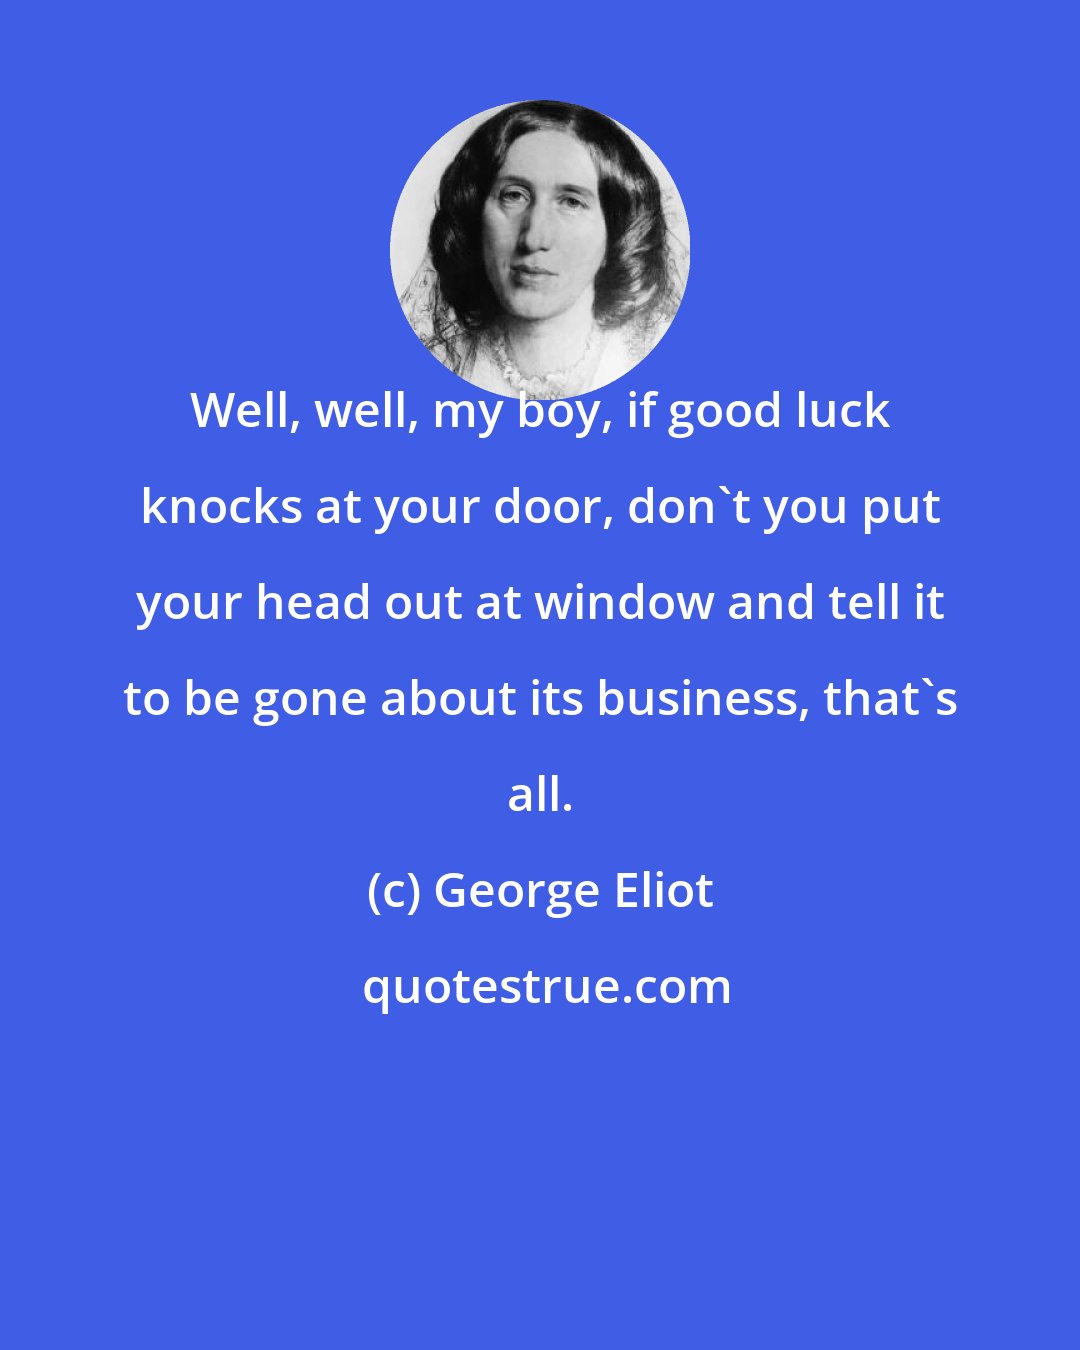 George Eliot: Well, well, my boy, if good luck knocks at your door, don't you put your head out at window and tell it to be gone about its business, that's all.